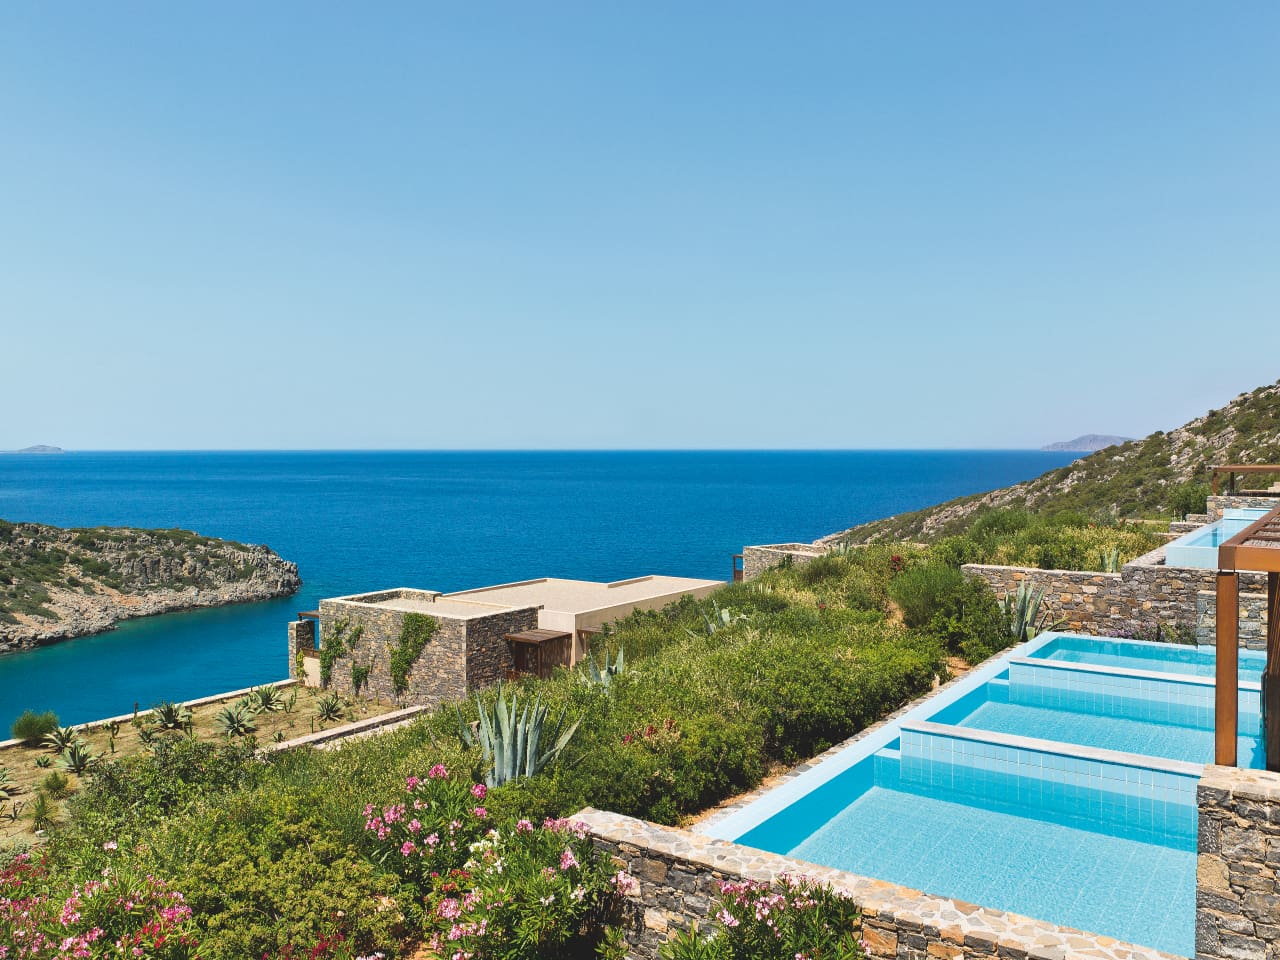 Daios Cove Luxury Resort & Villas enjoy the relaxation mode